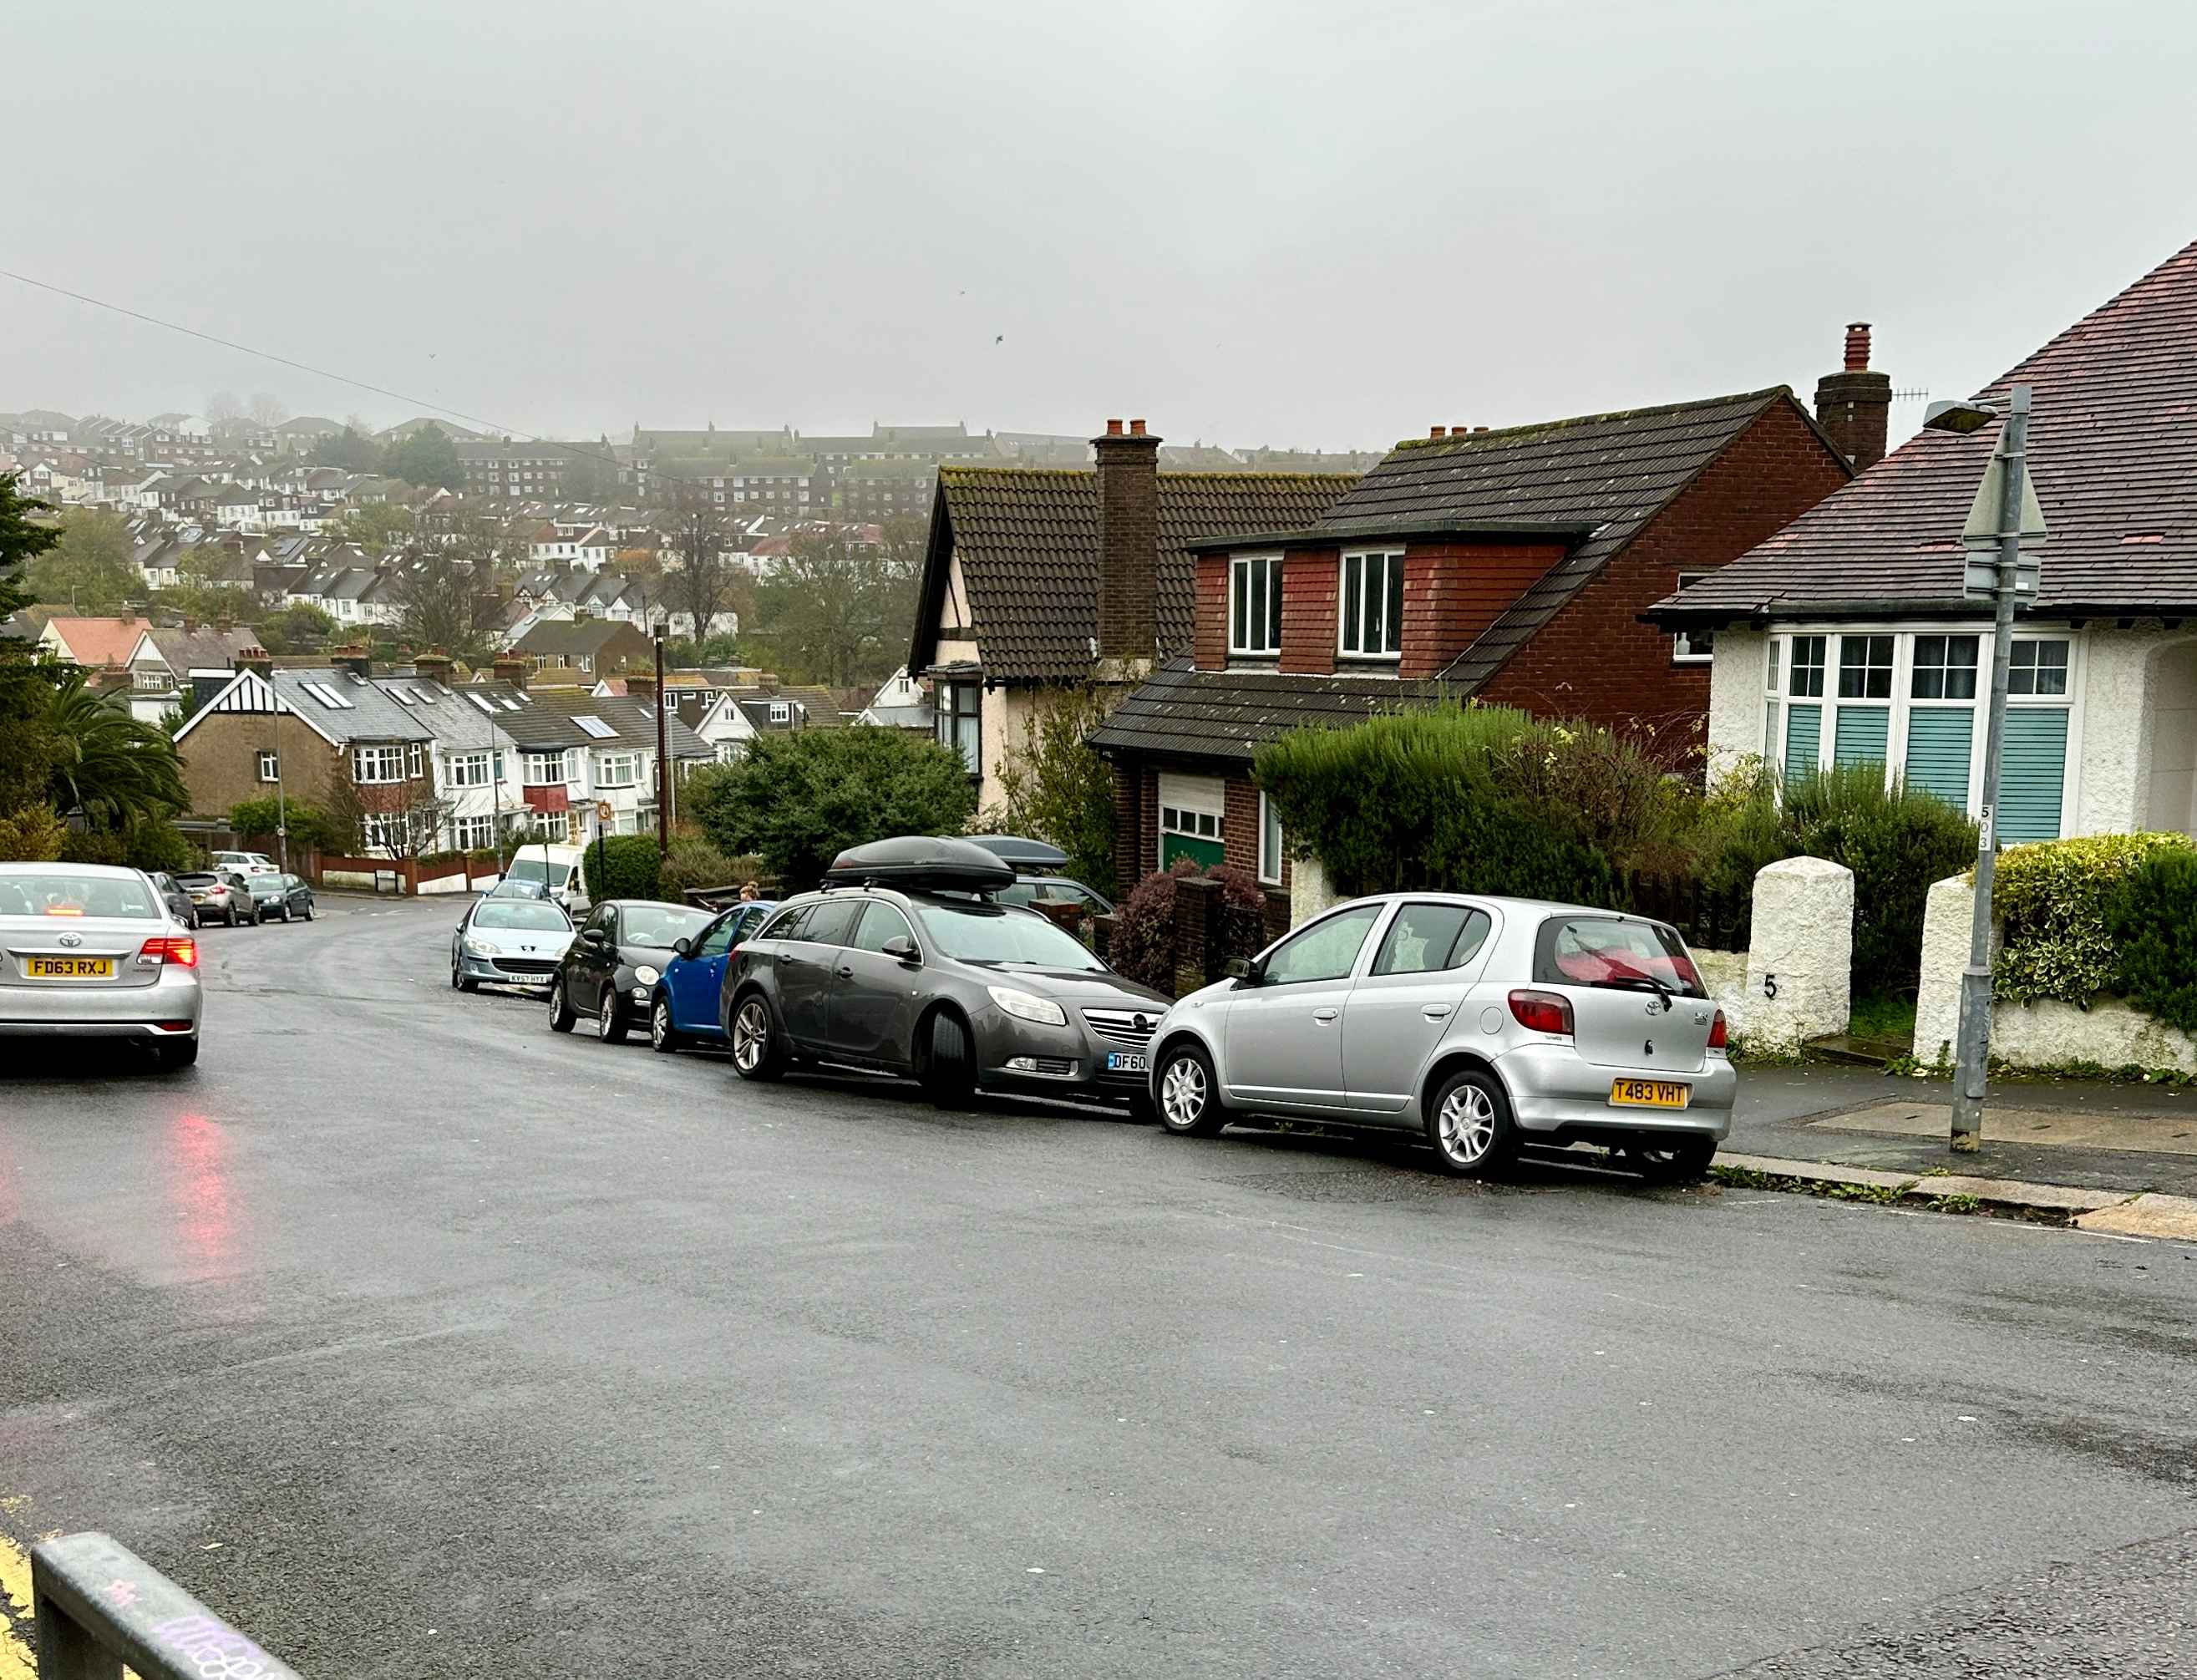 Photograph of DF60 DWZ - a Grey Vauxhall Insignia parked in Hollingdean by a non-resident. The third of nine photographs supplied by the residents of Hollingdean.